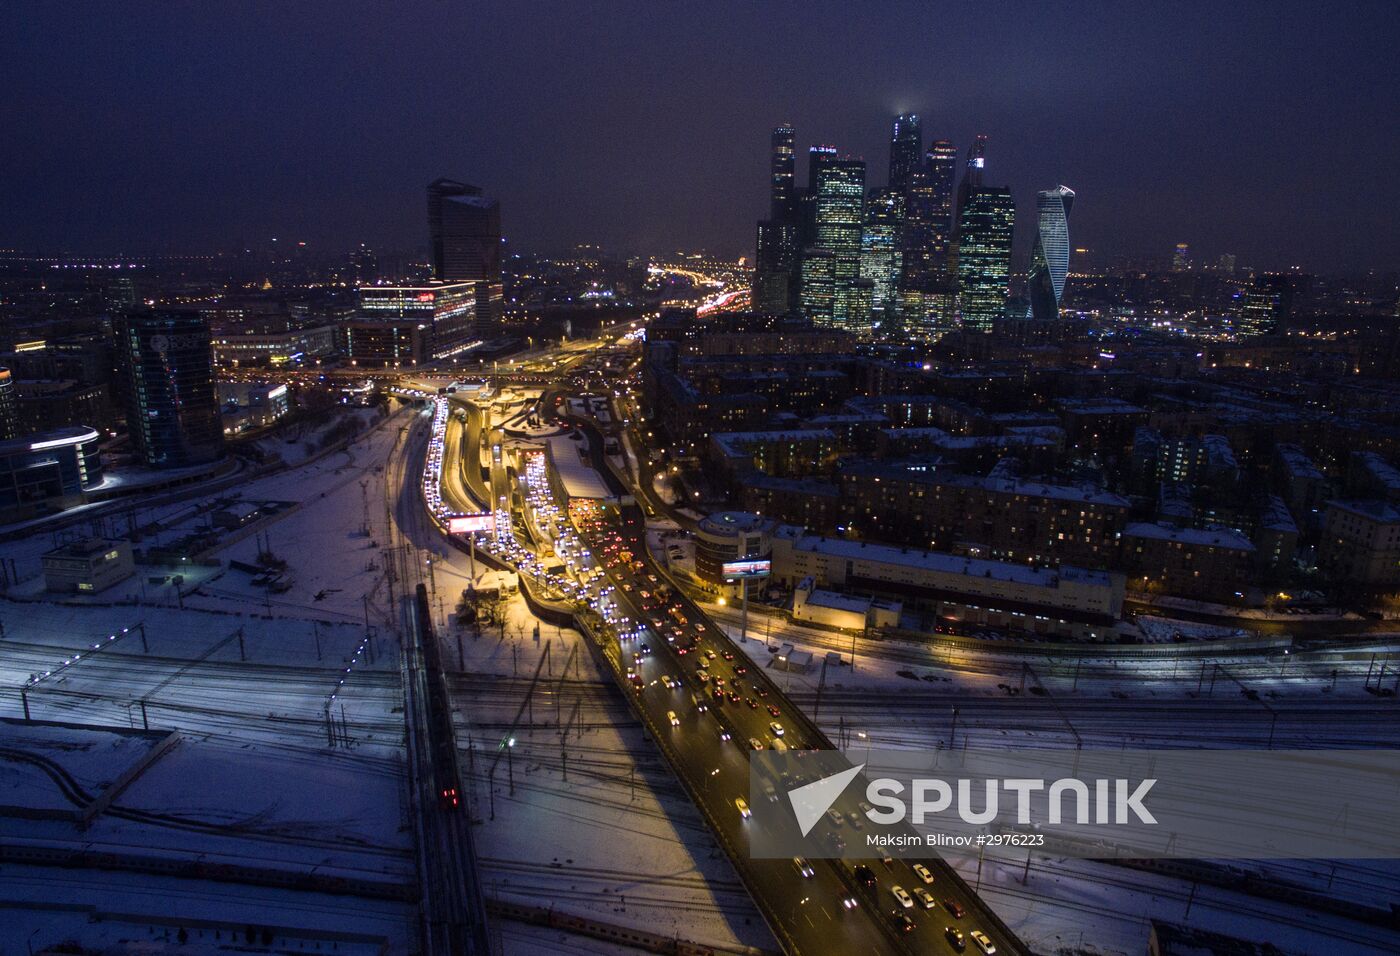 Third interchange circuit, Smaller Moscow Belt Railway and Moscow City